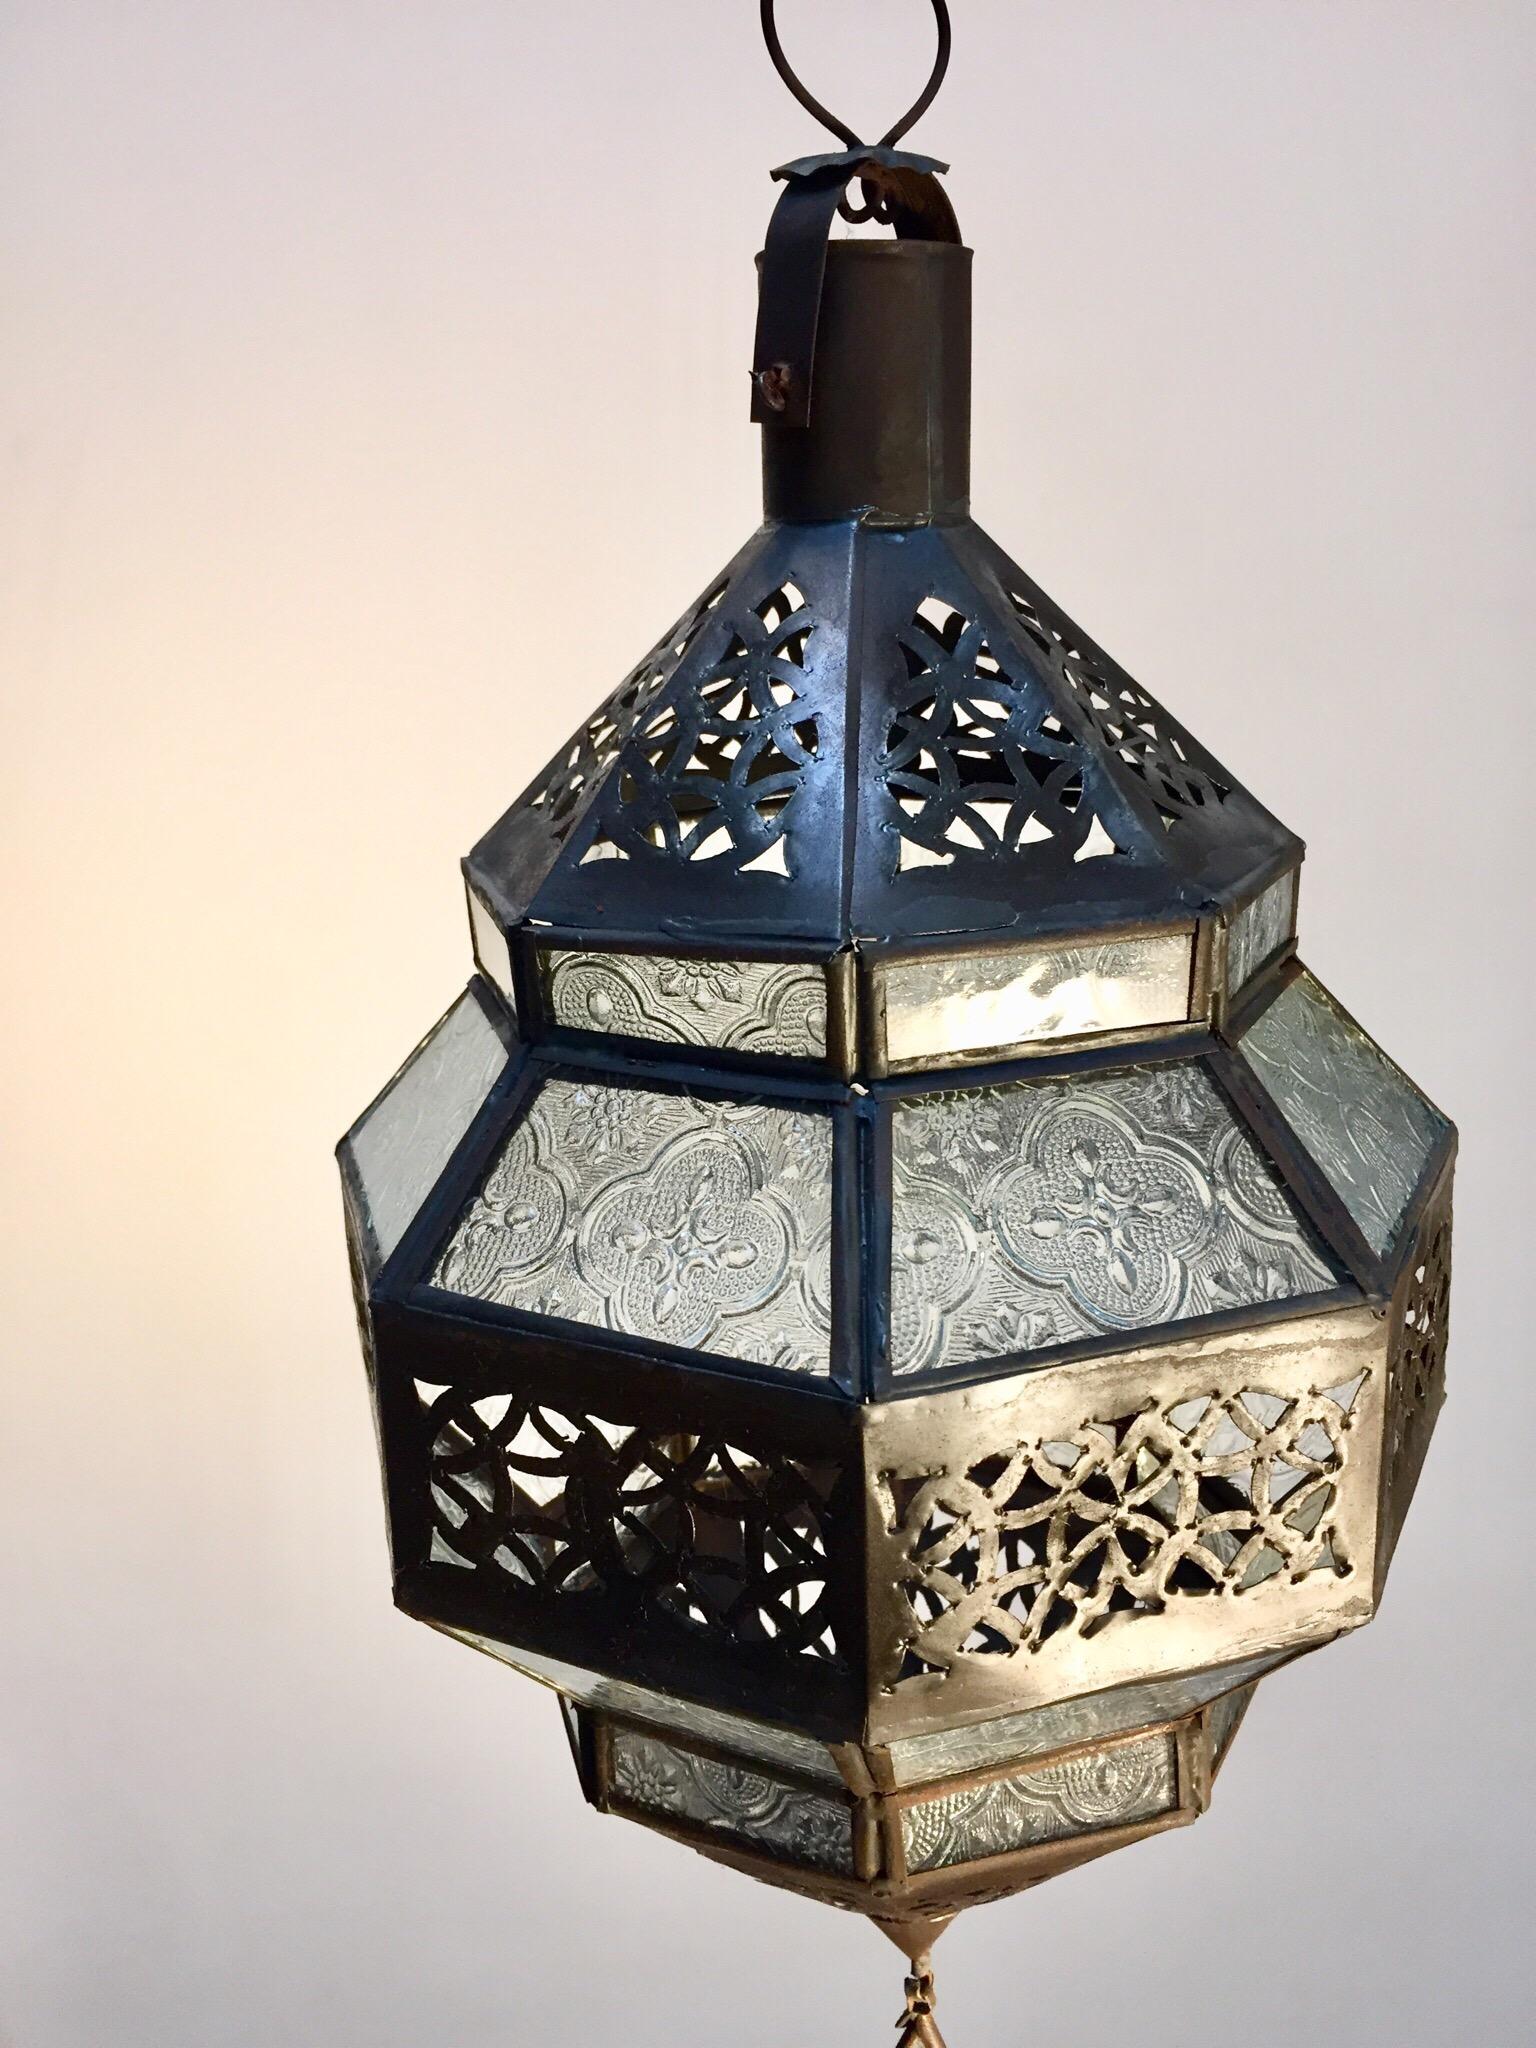 Hand-Crafted Handcrafted Moroccan Metal Lantern, Octagonal Shape with Clear Glass